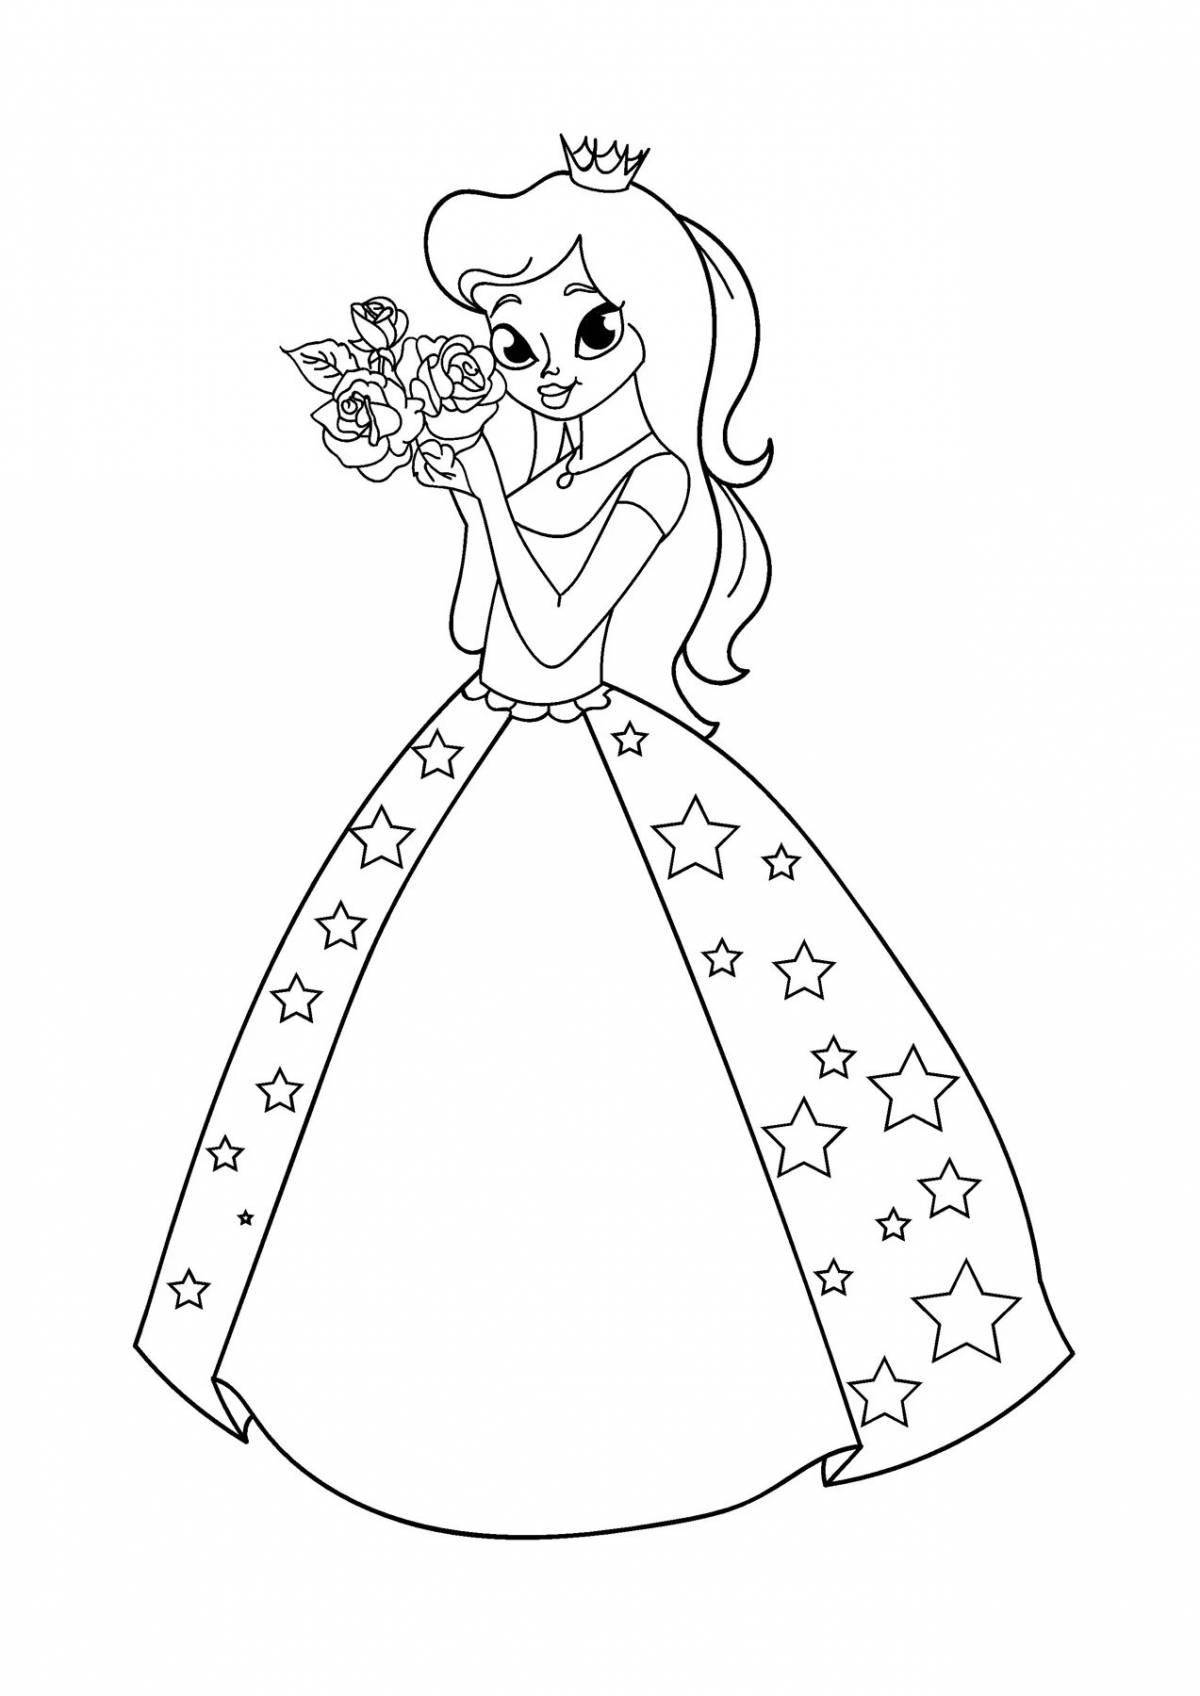 Princess coloring pages for girls 7 years old